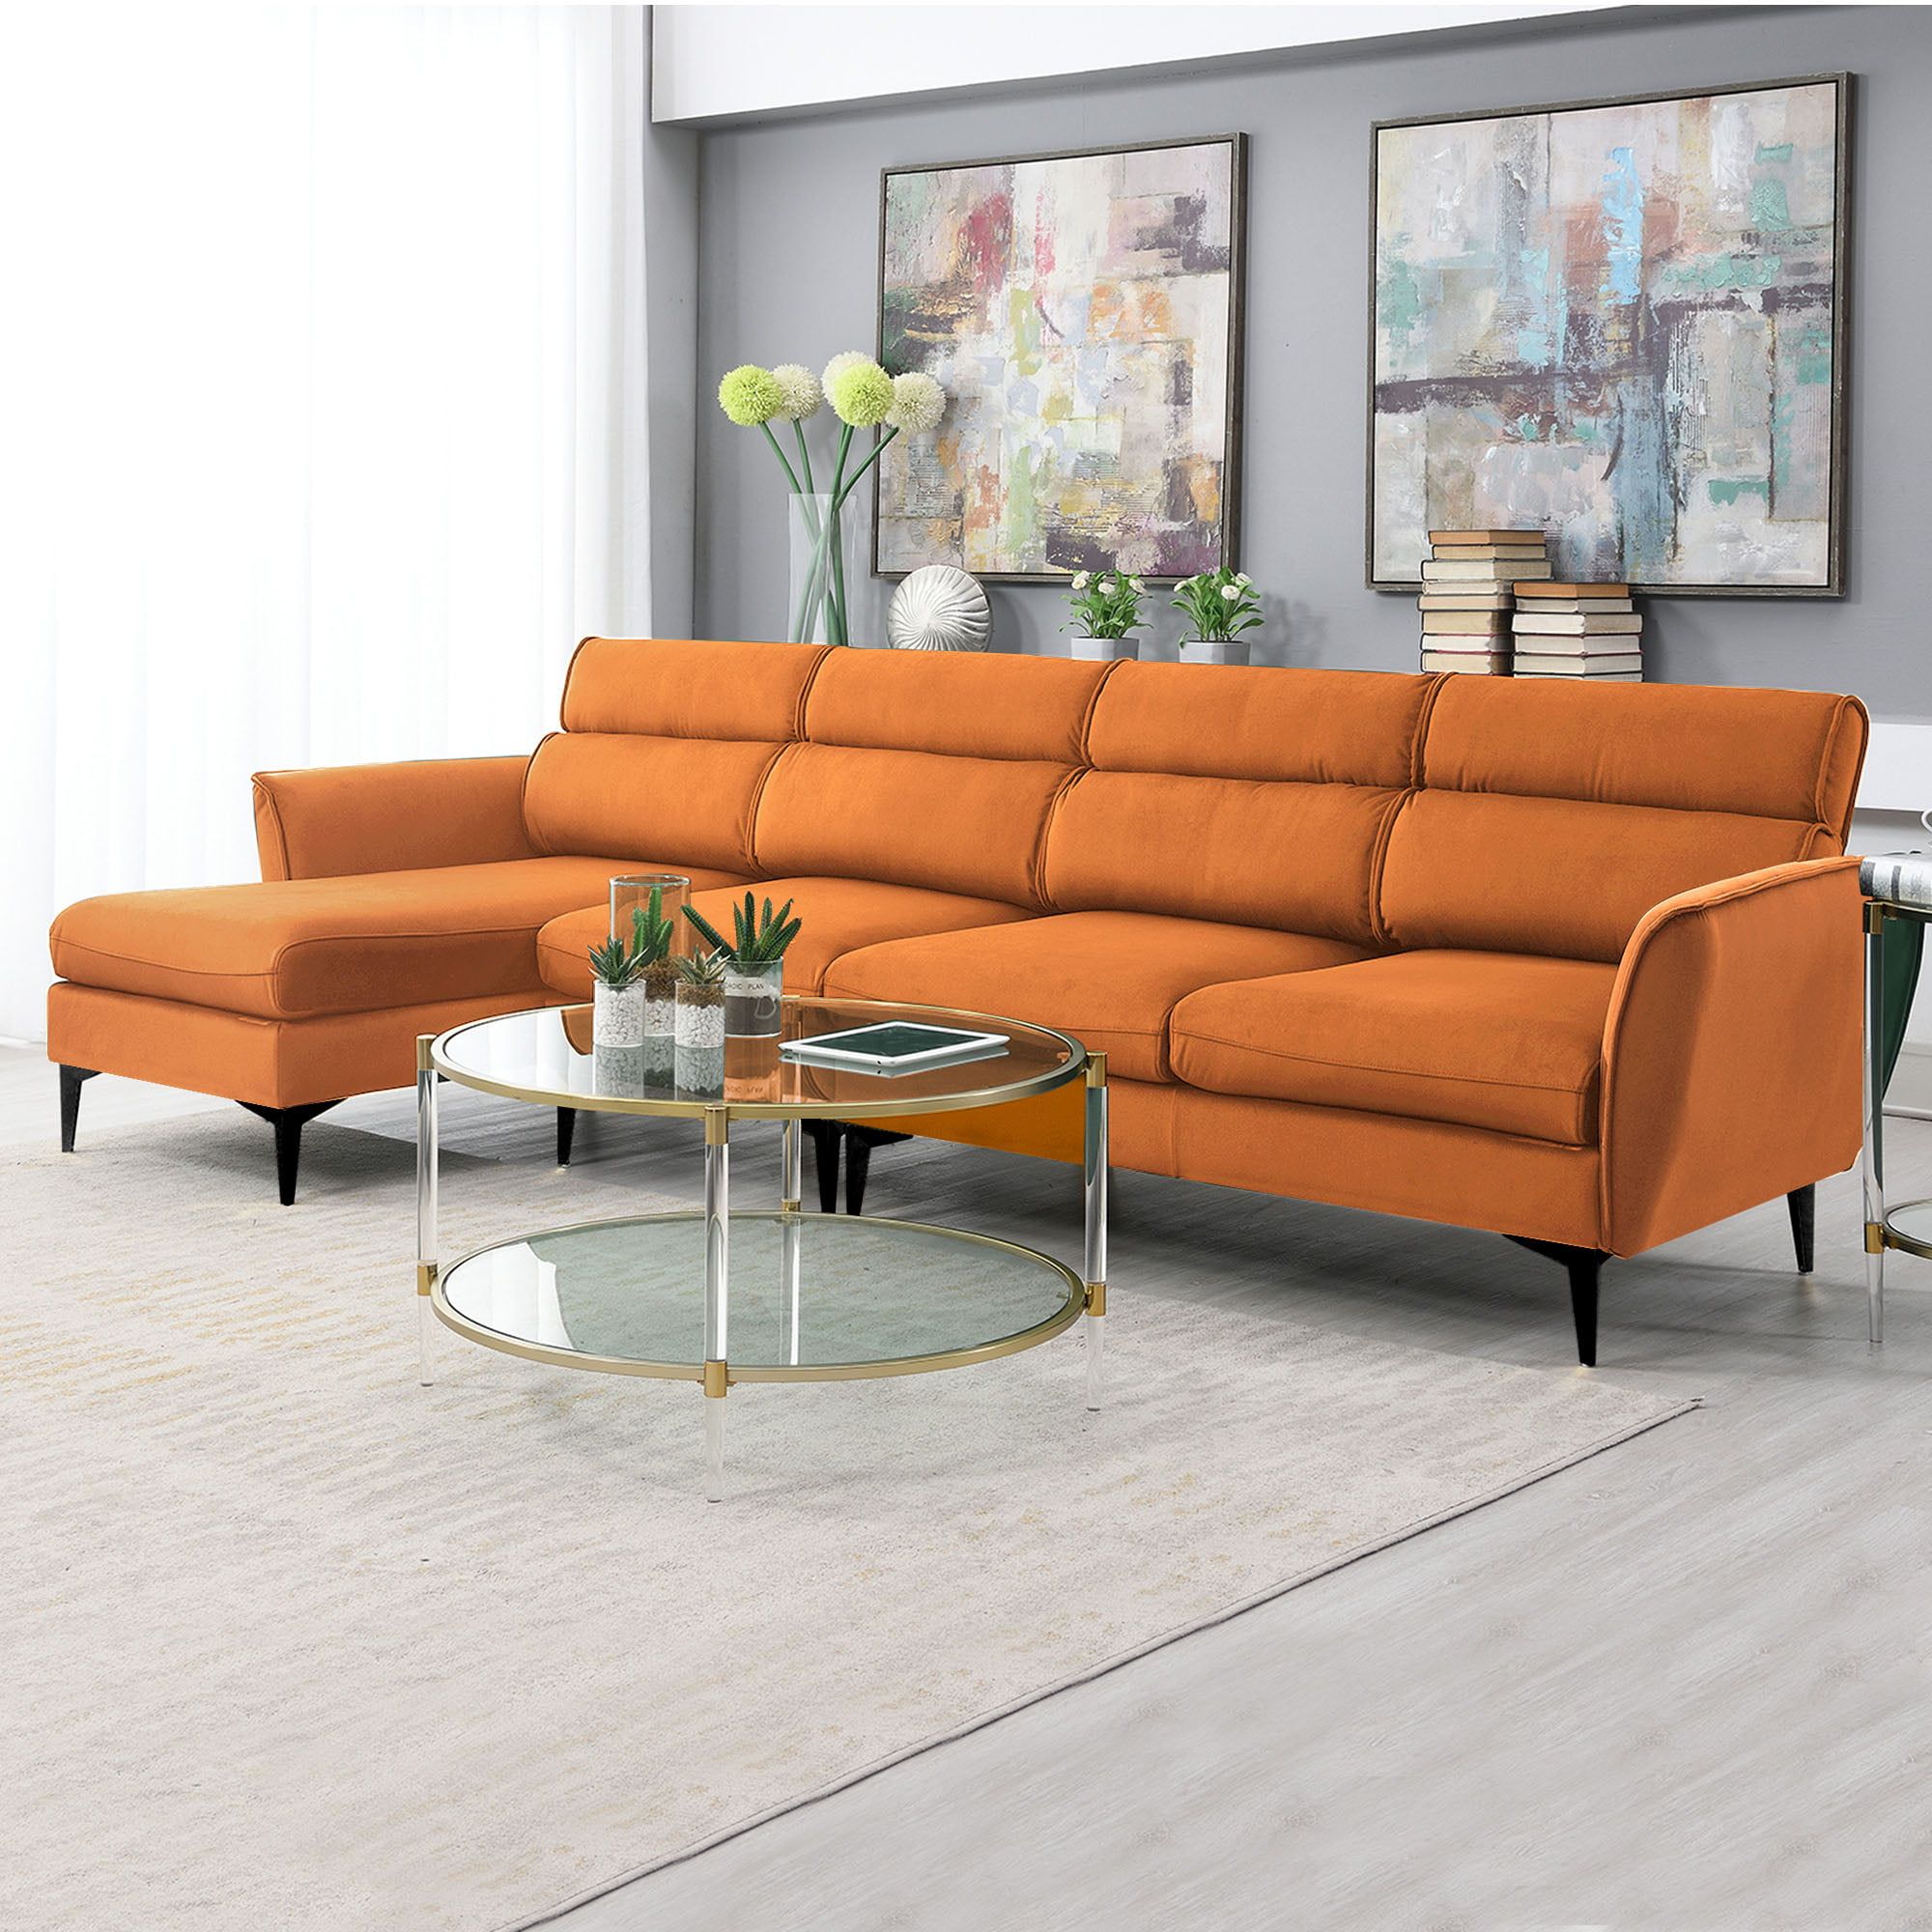 111"l Convertible Sectional Sofa Couch, Flannel L Shaped Couch With  Left/right Chaise, Modern Heavy Duty 4 Seater Sectional Couch, Kamida Sectional  Couch Furniture For Living Room, Orange – Walmart Within Heavy Duty Sectional Couches (View 3 of 20)